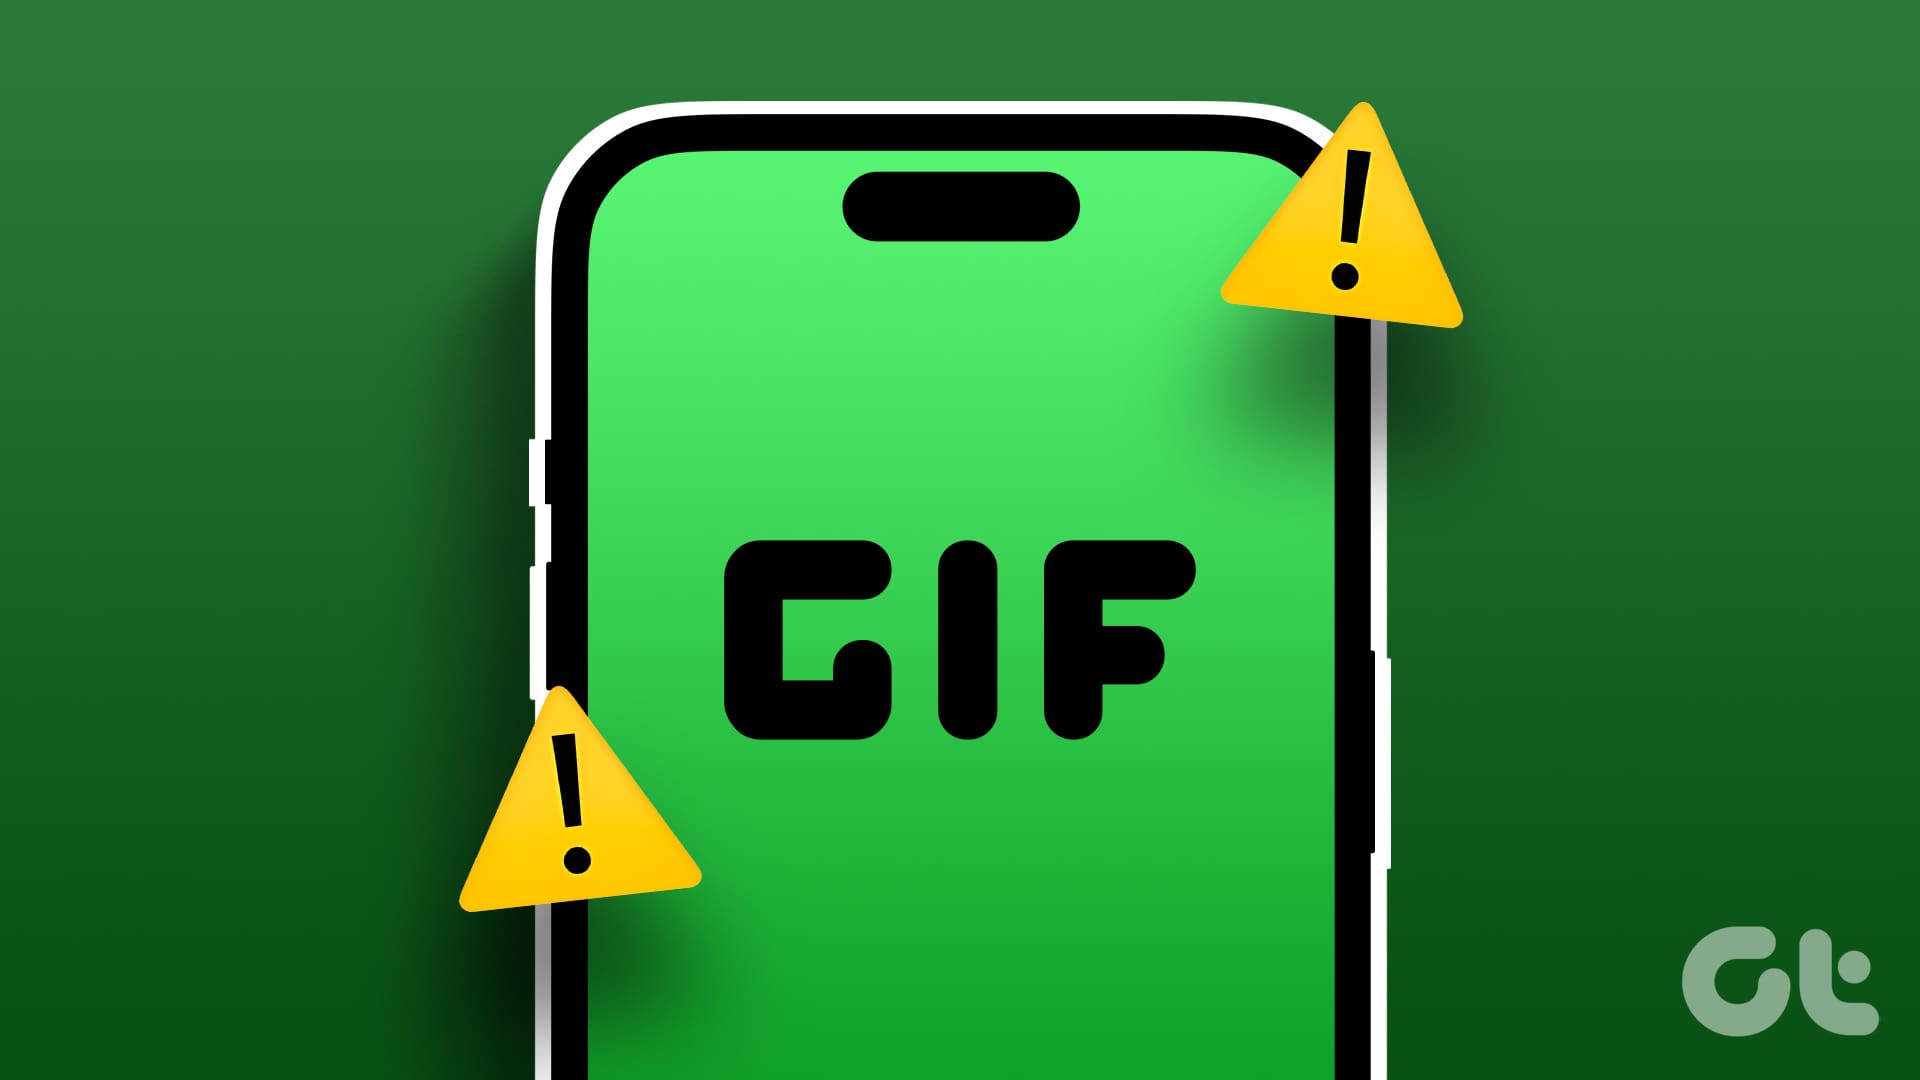 How to Fix GIFs Not Working or Disappeared on iPhone